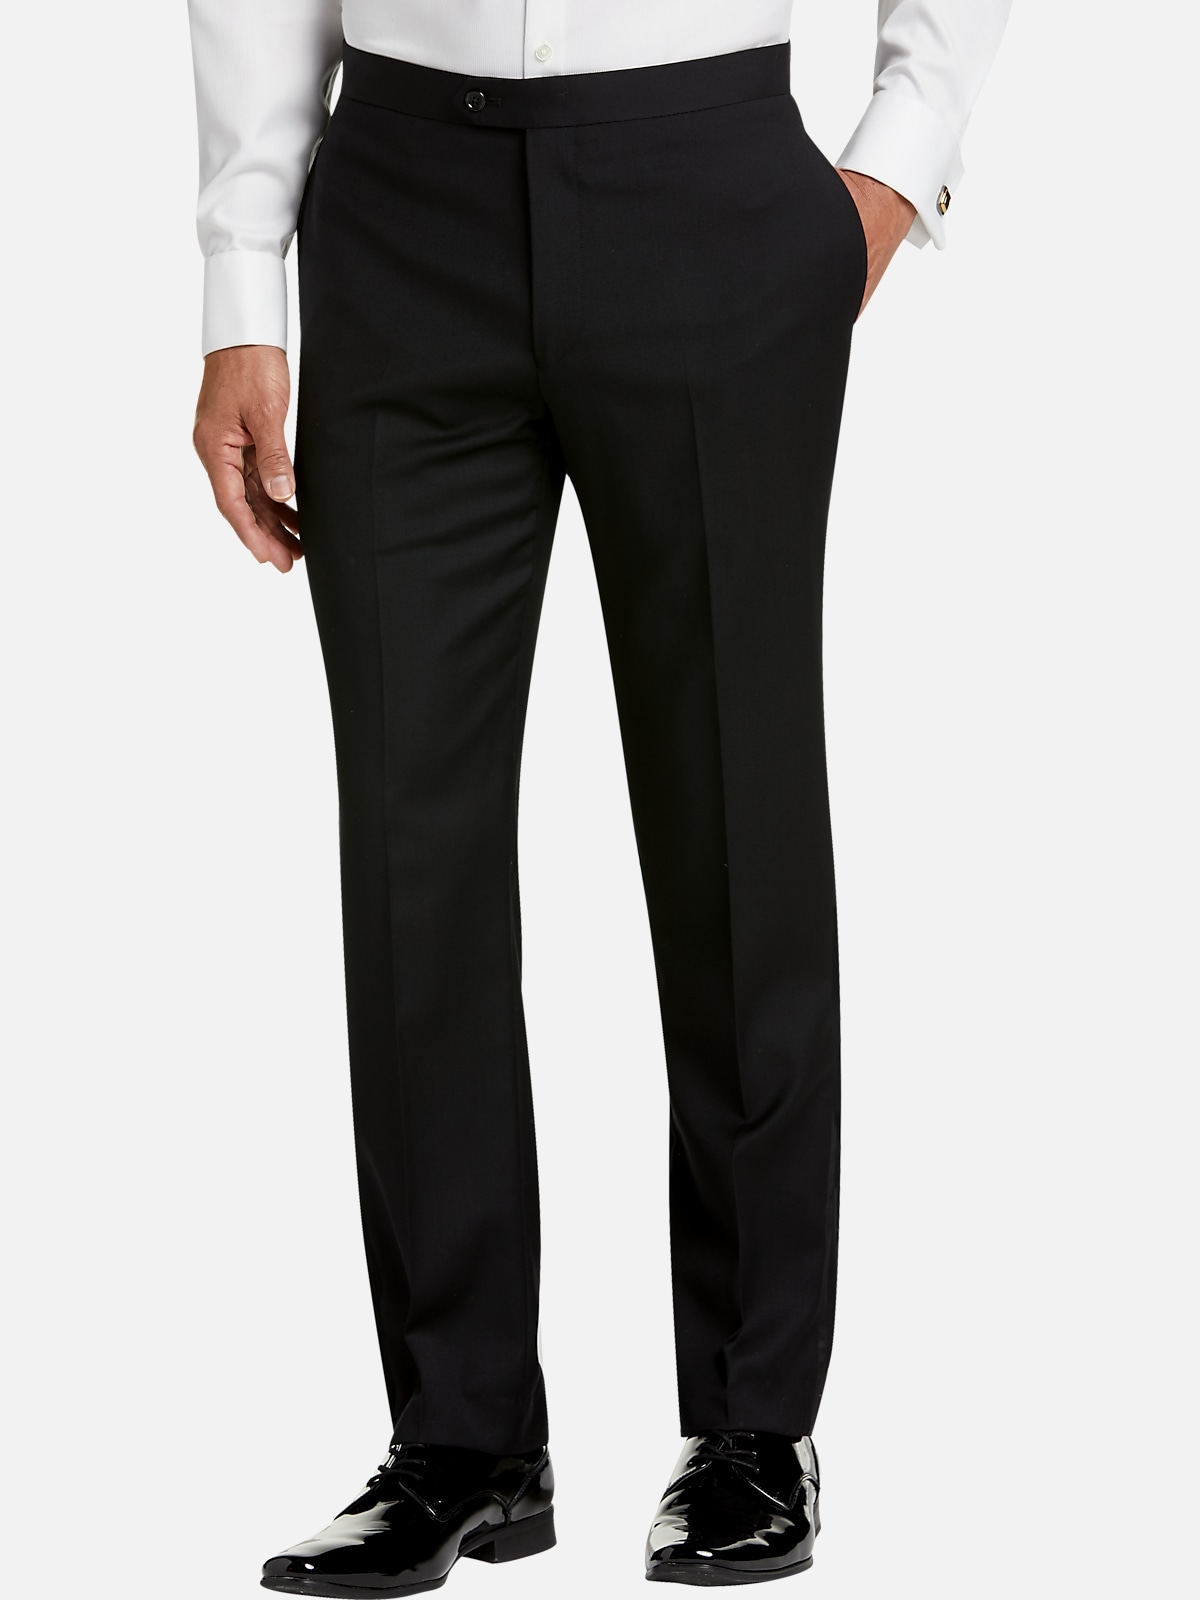 Calvin Klein Extreme Slim Fit Tuxedo Separates Pants | All Clearance ...